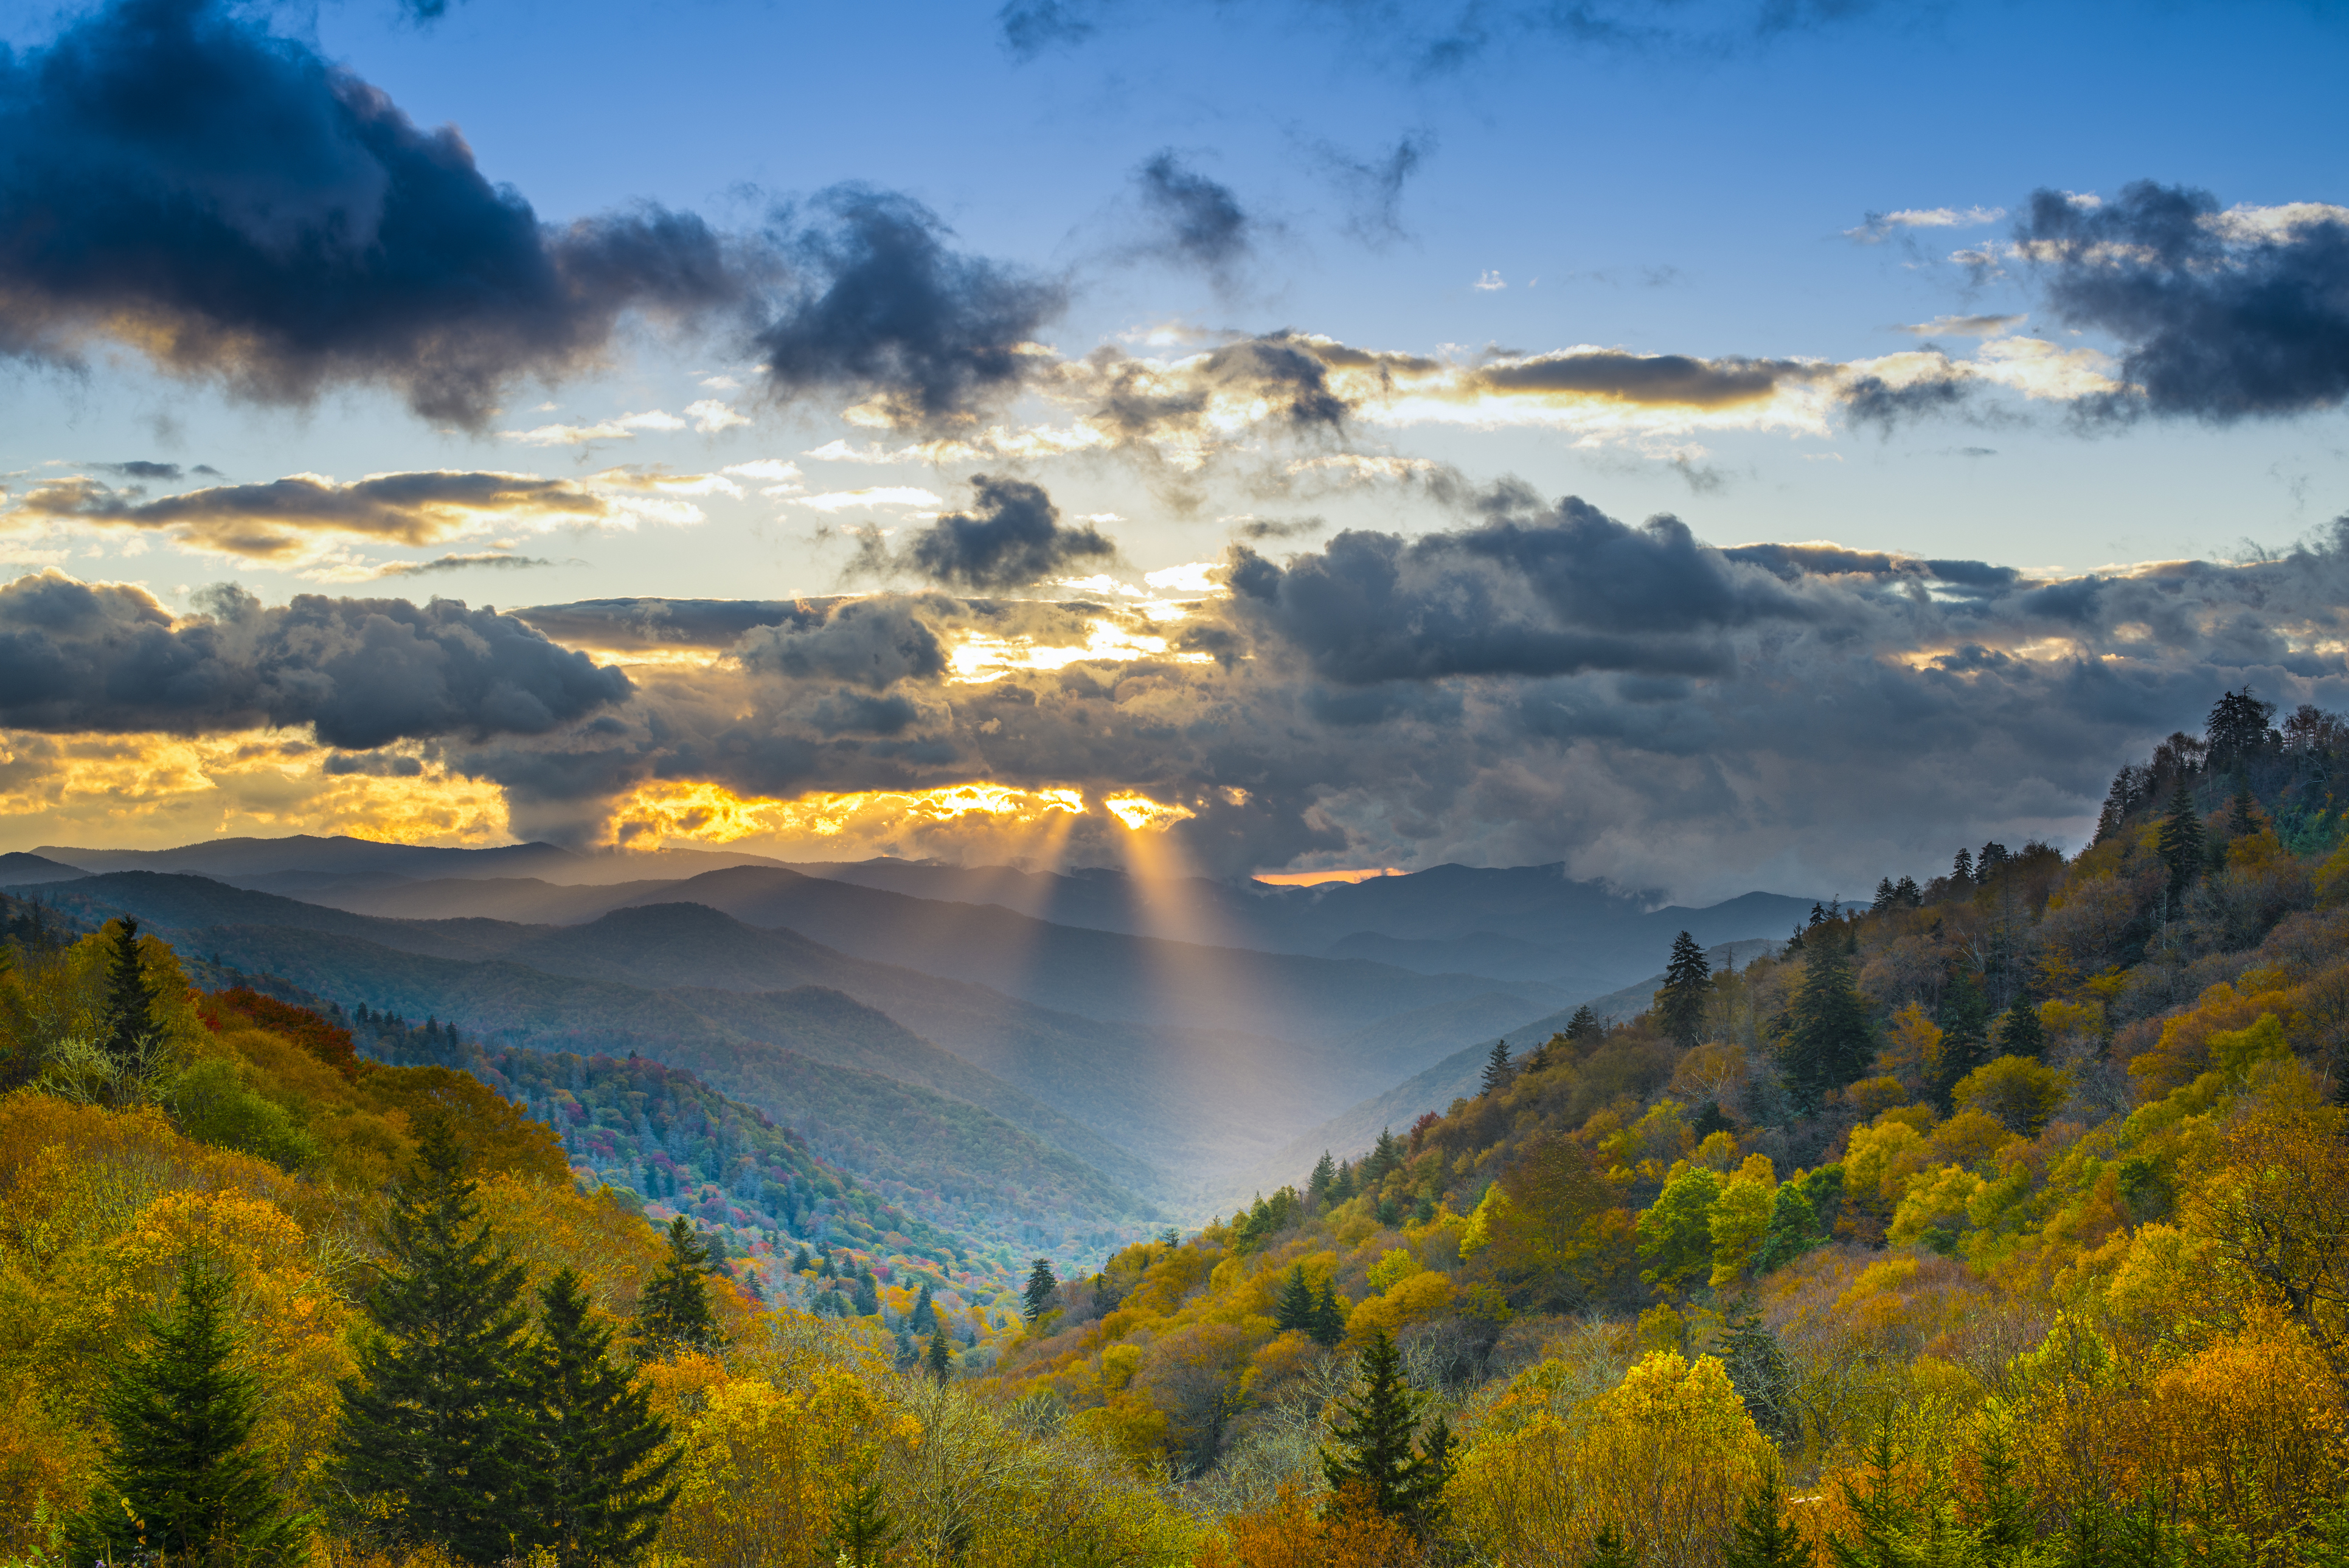 Sun rays coming through clouds in beautiful Smoky Mountains